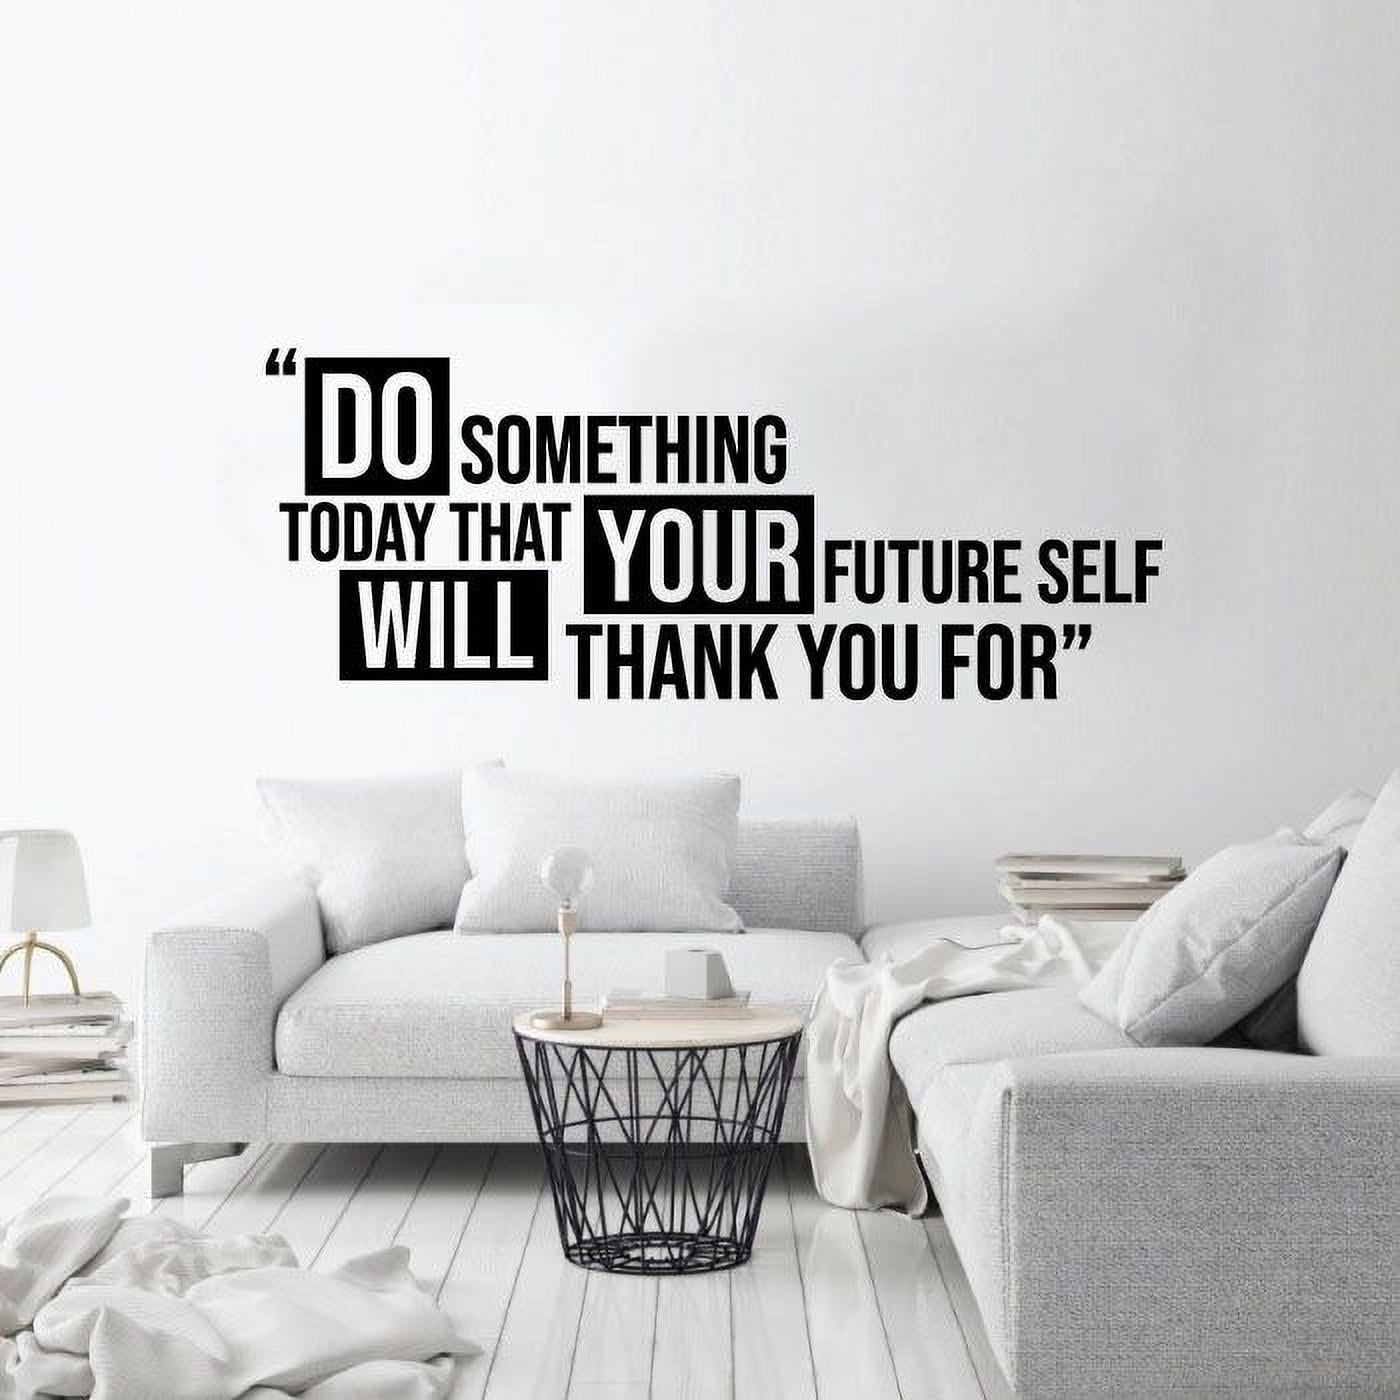 Start Somewhere 8 x 25 White Vinyl Wall Art Decal Trendy Motivational Optimism Quote Sticker for Home Bedroom Work Office Living Room School Classroom Decor